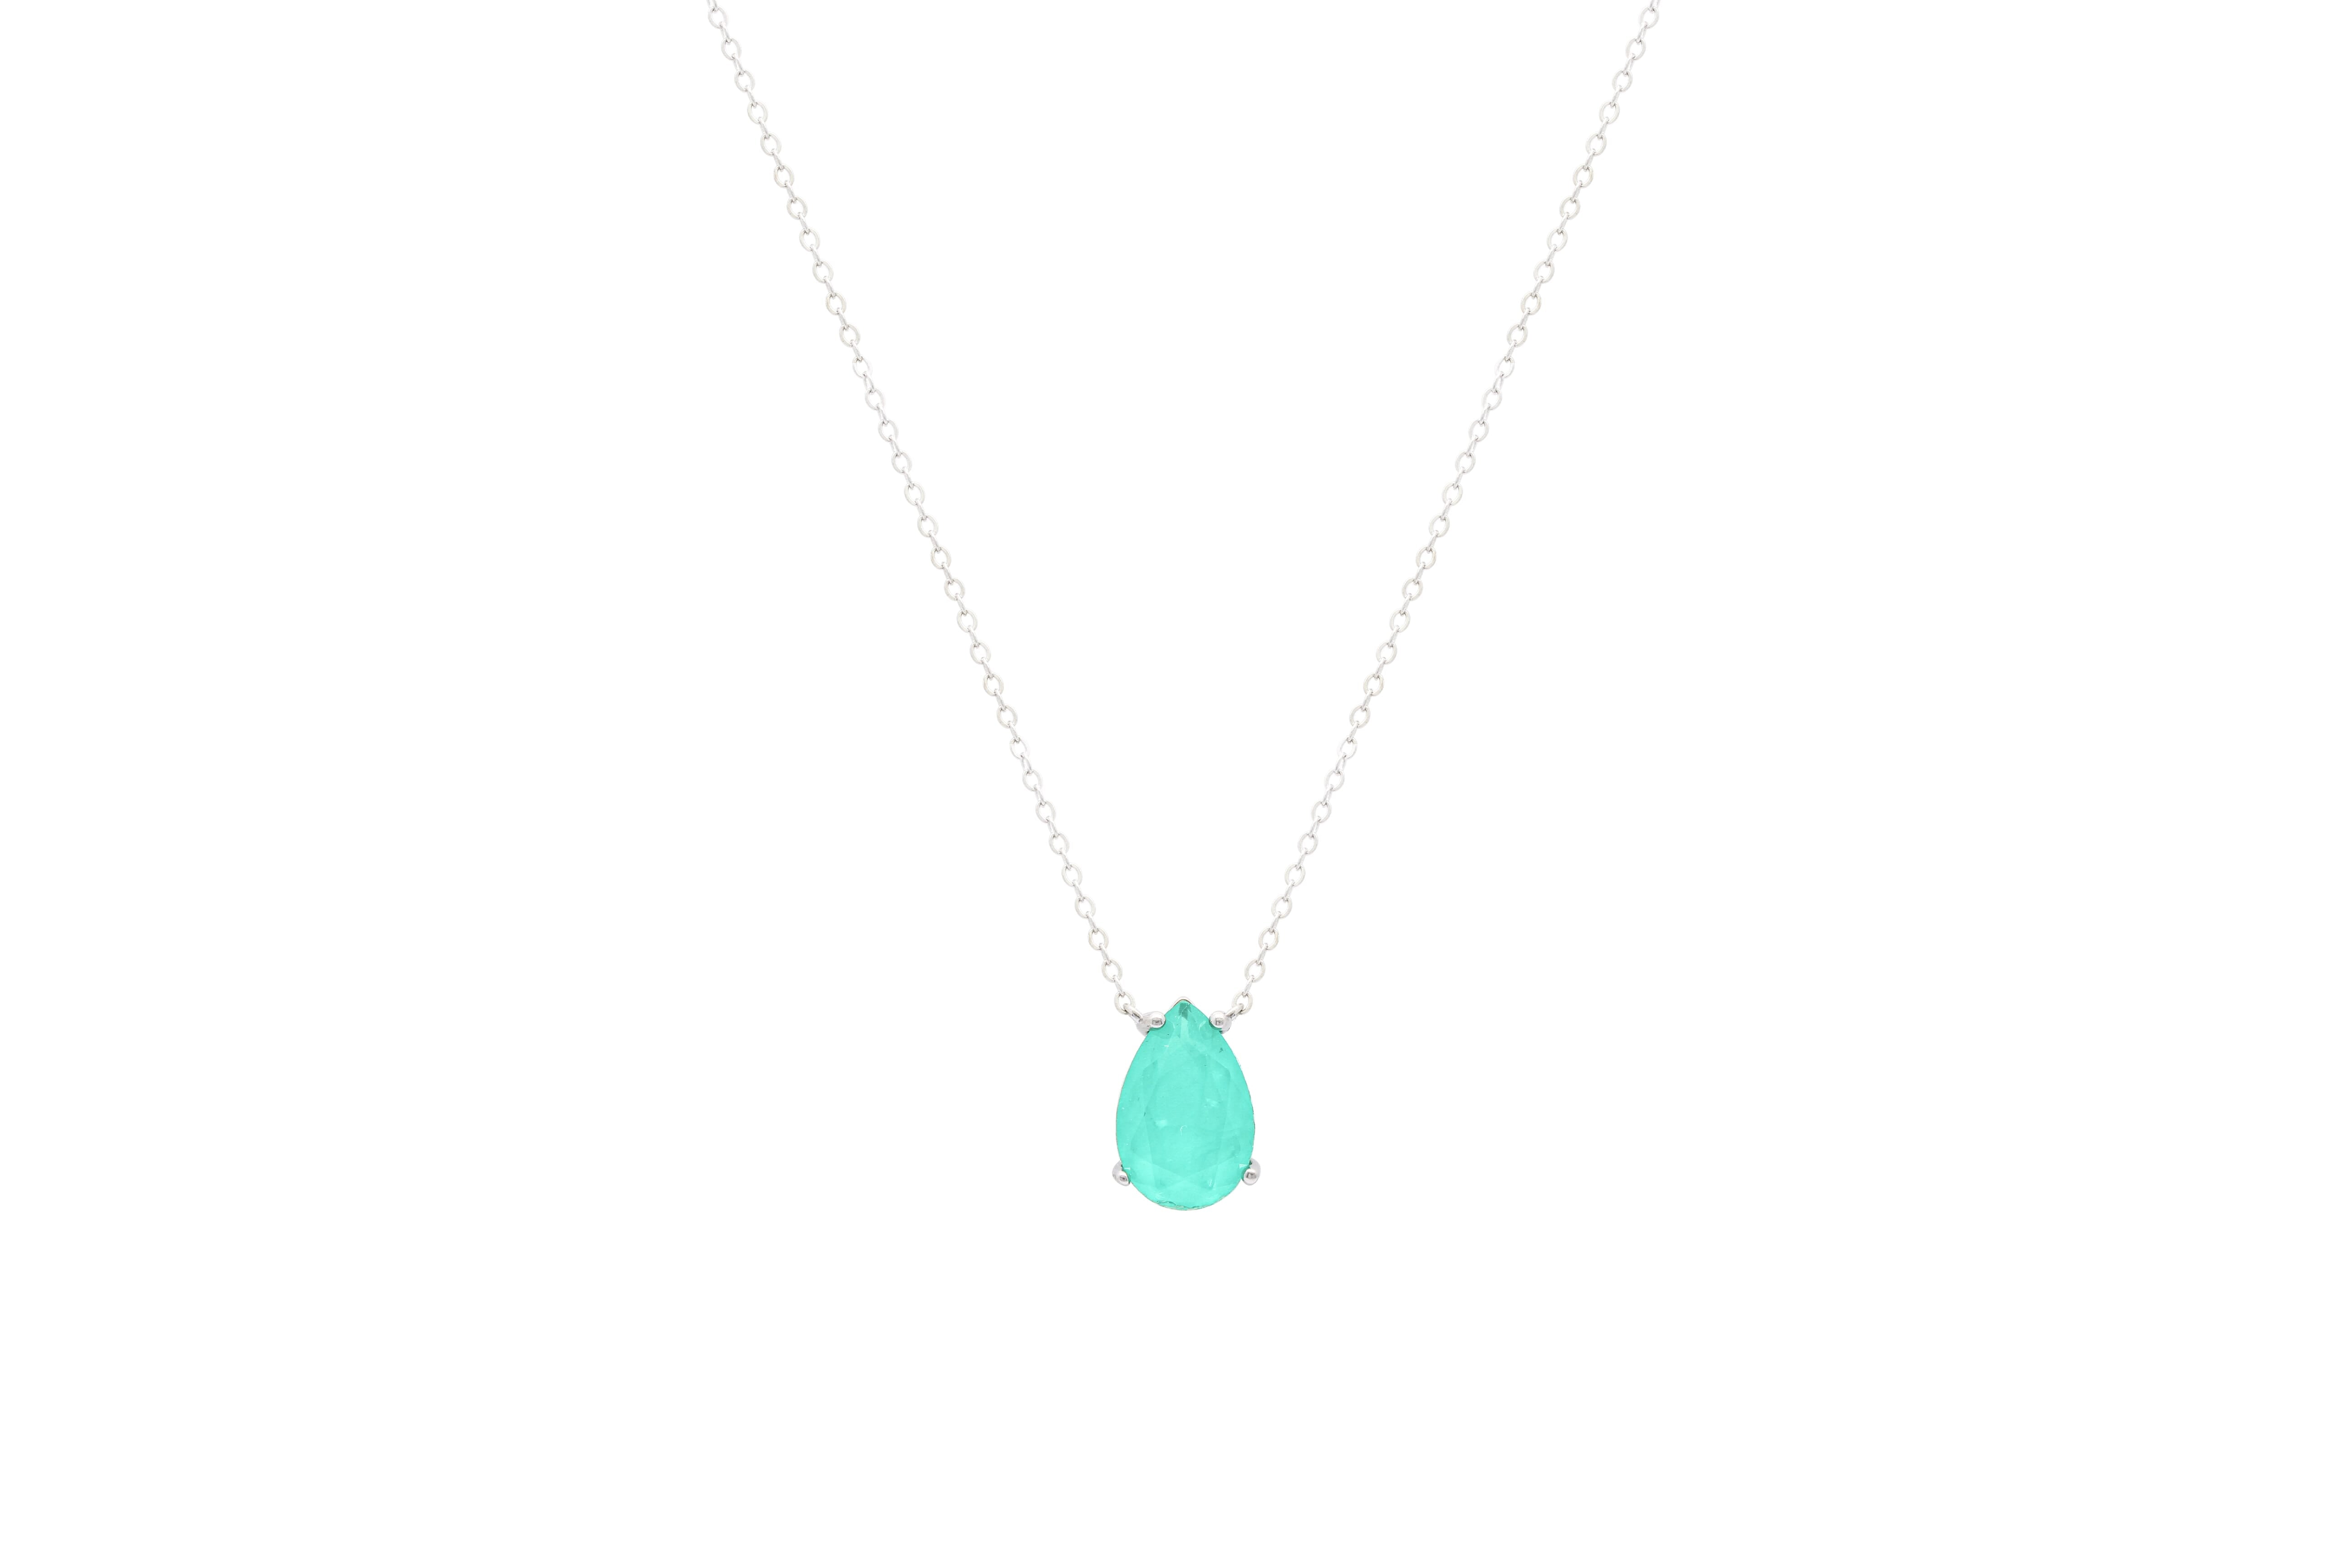 Asfour Crystal Chain Necklace With Aquamarine Tear Drop Design In 925 Sterling Silver ND0019-GC